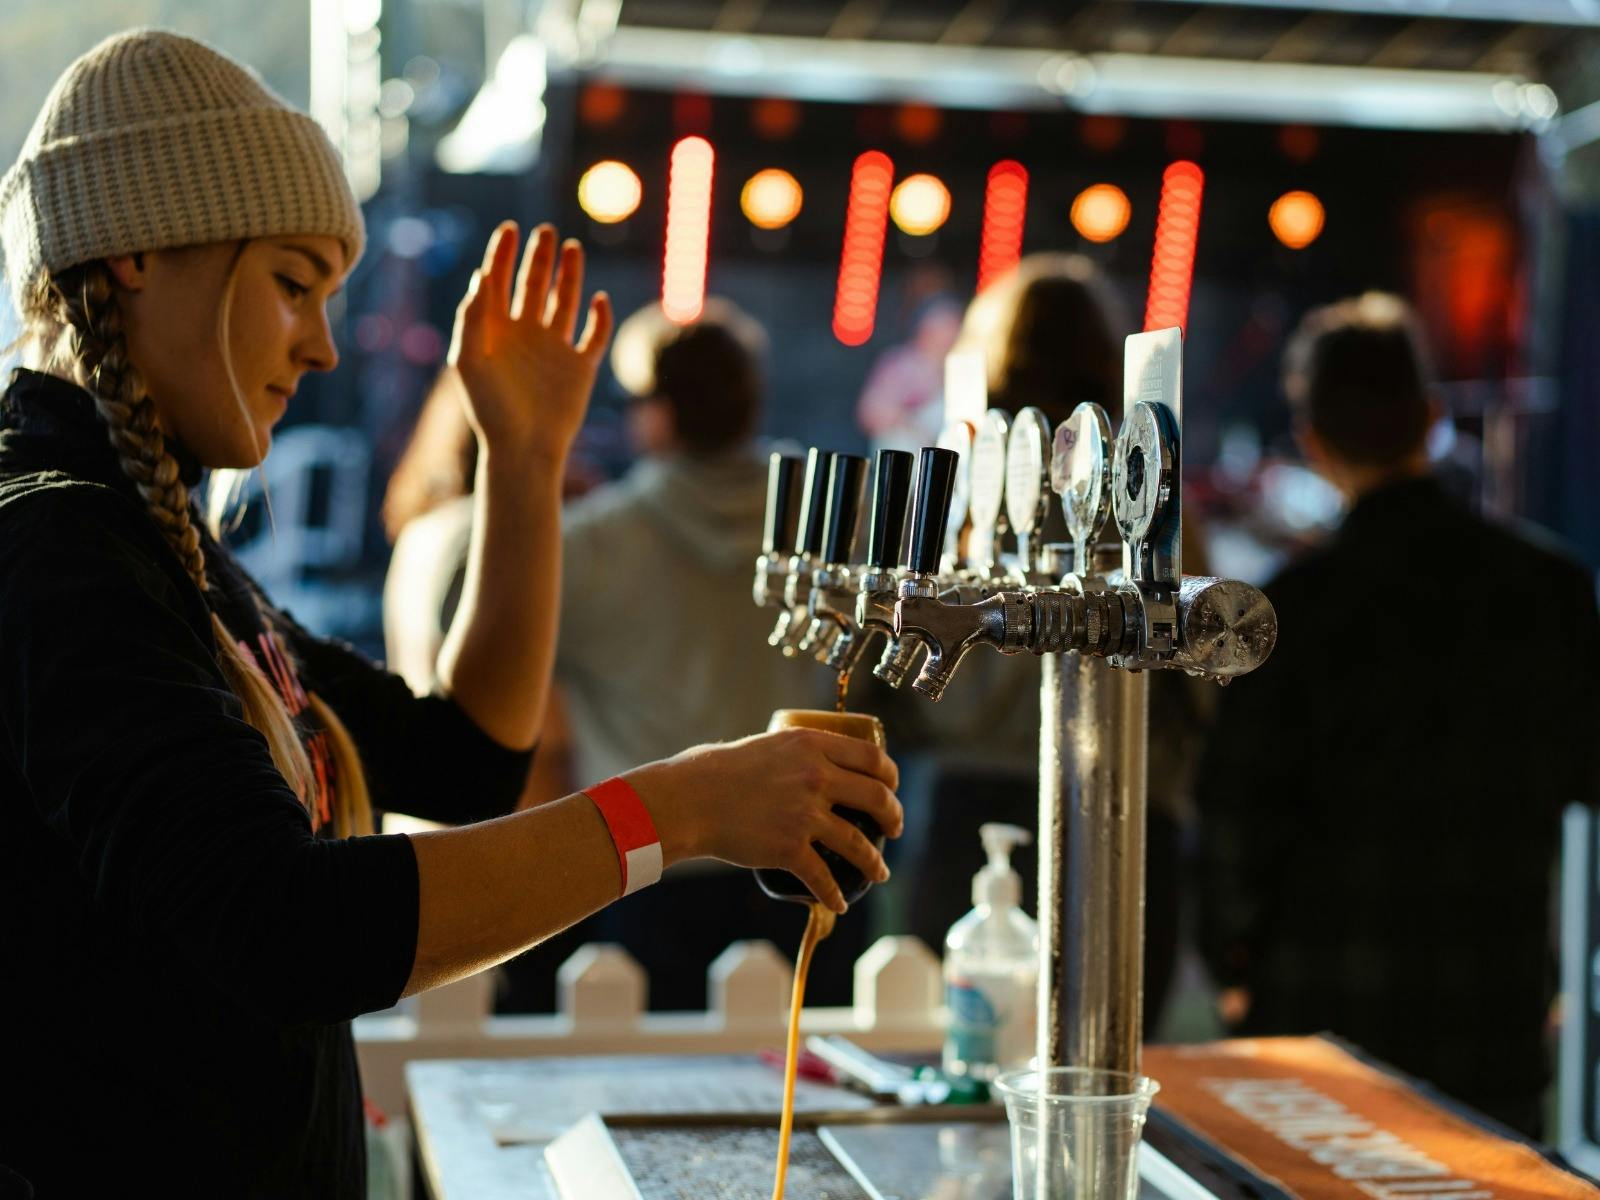 Enjoy craft beers from local and guest breweries from all over Australia